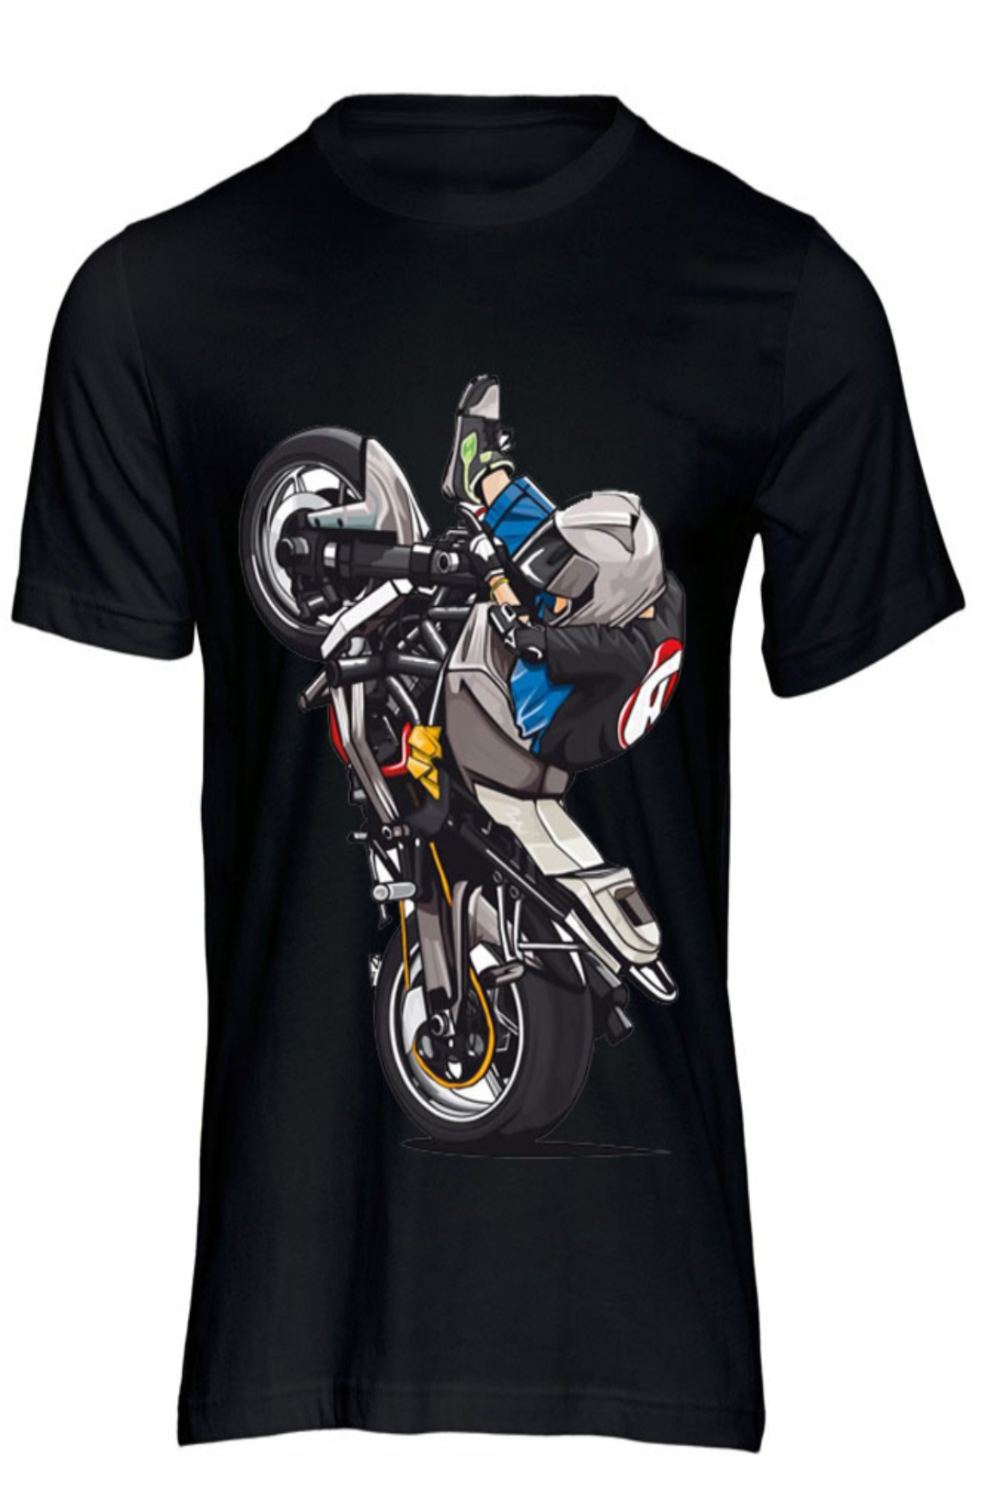 MOTO GP DESINGS IN 7 DIFFERENT COLORS pinterest preview image.